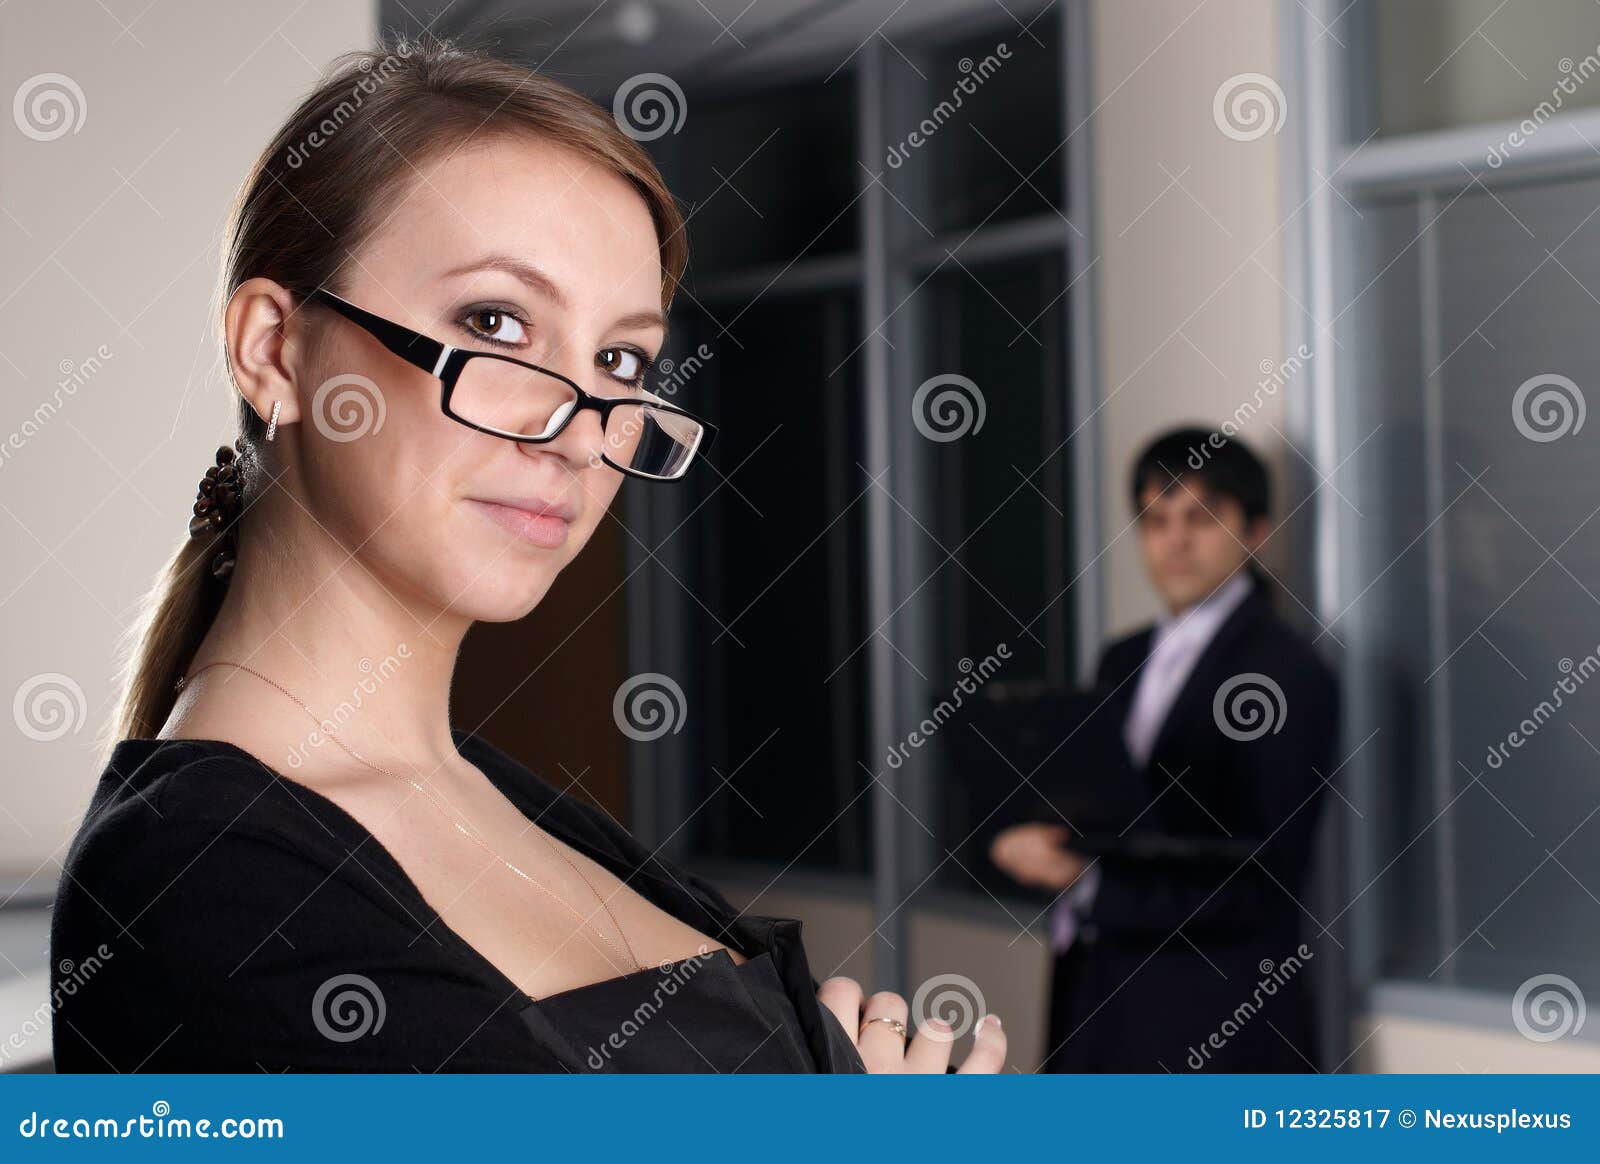 businesswoman with collegue in office